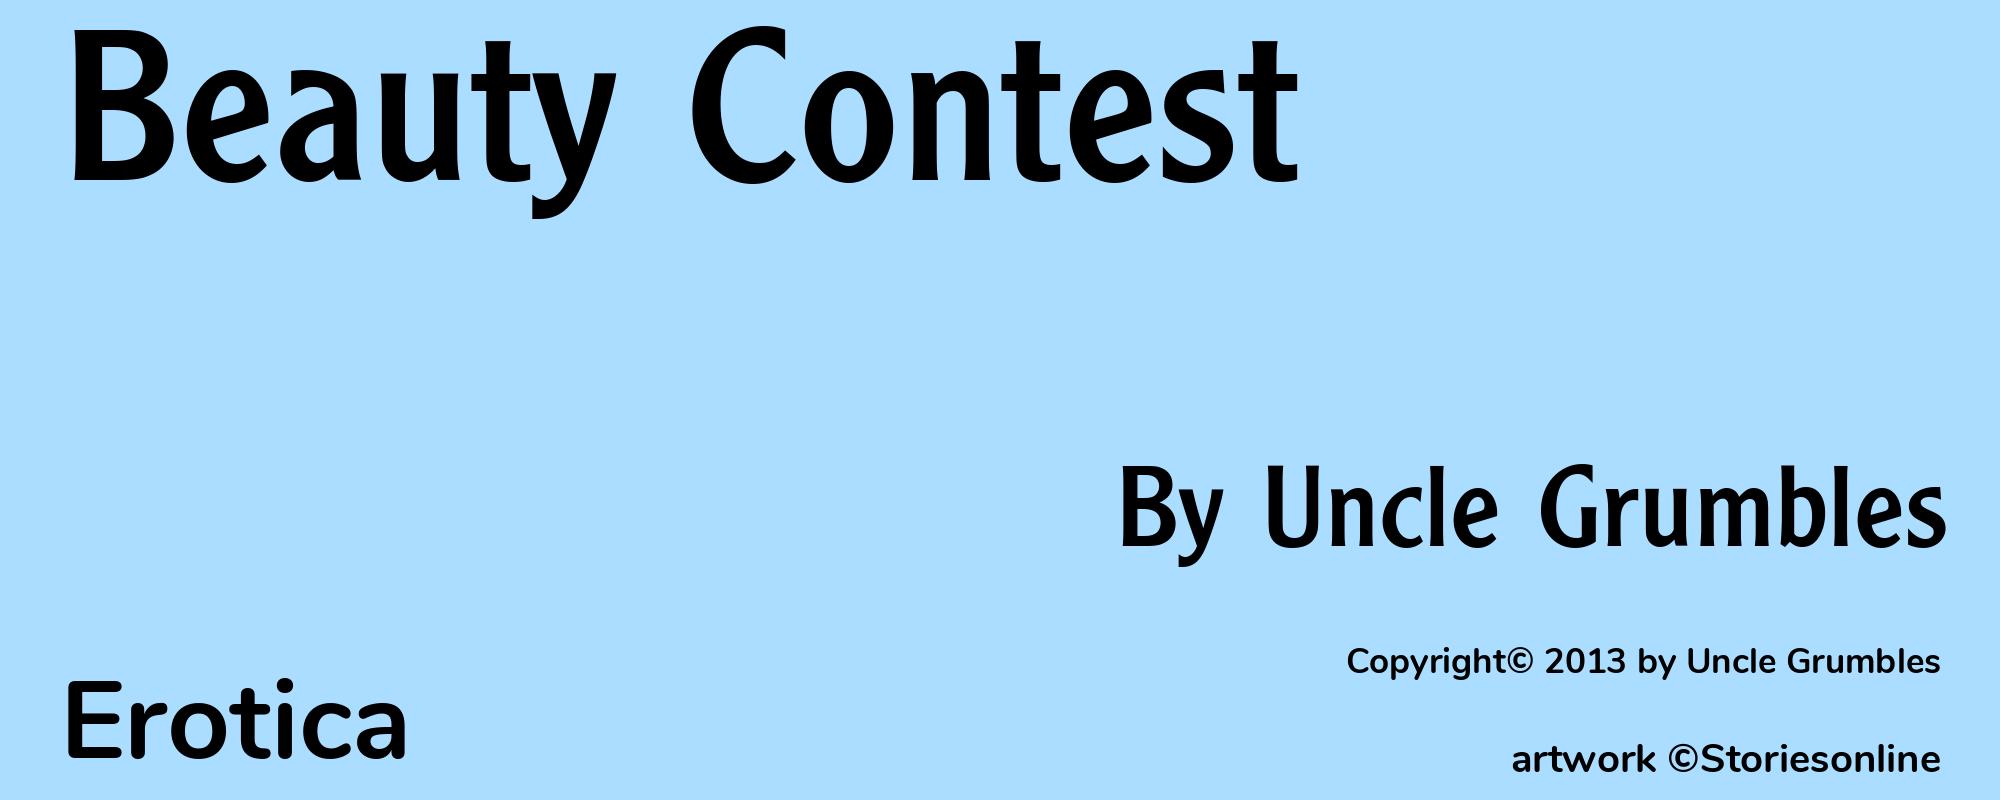 Beauty Contest - Cover